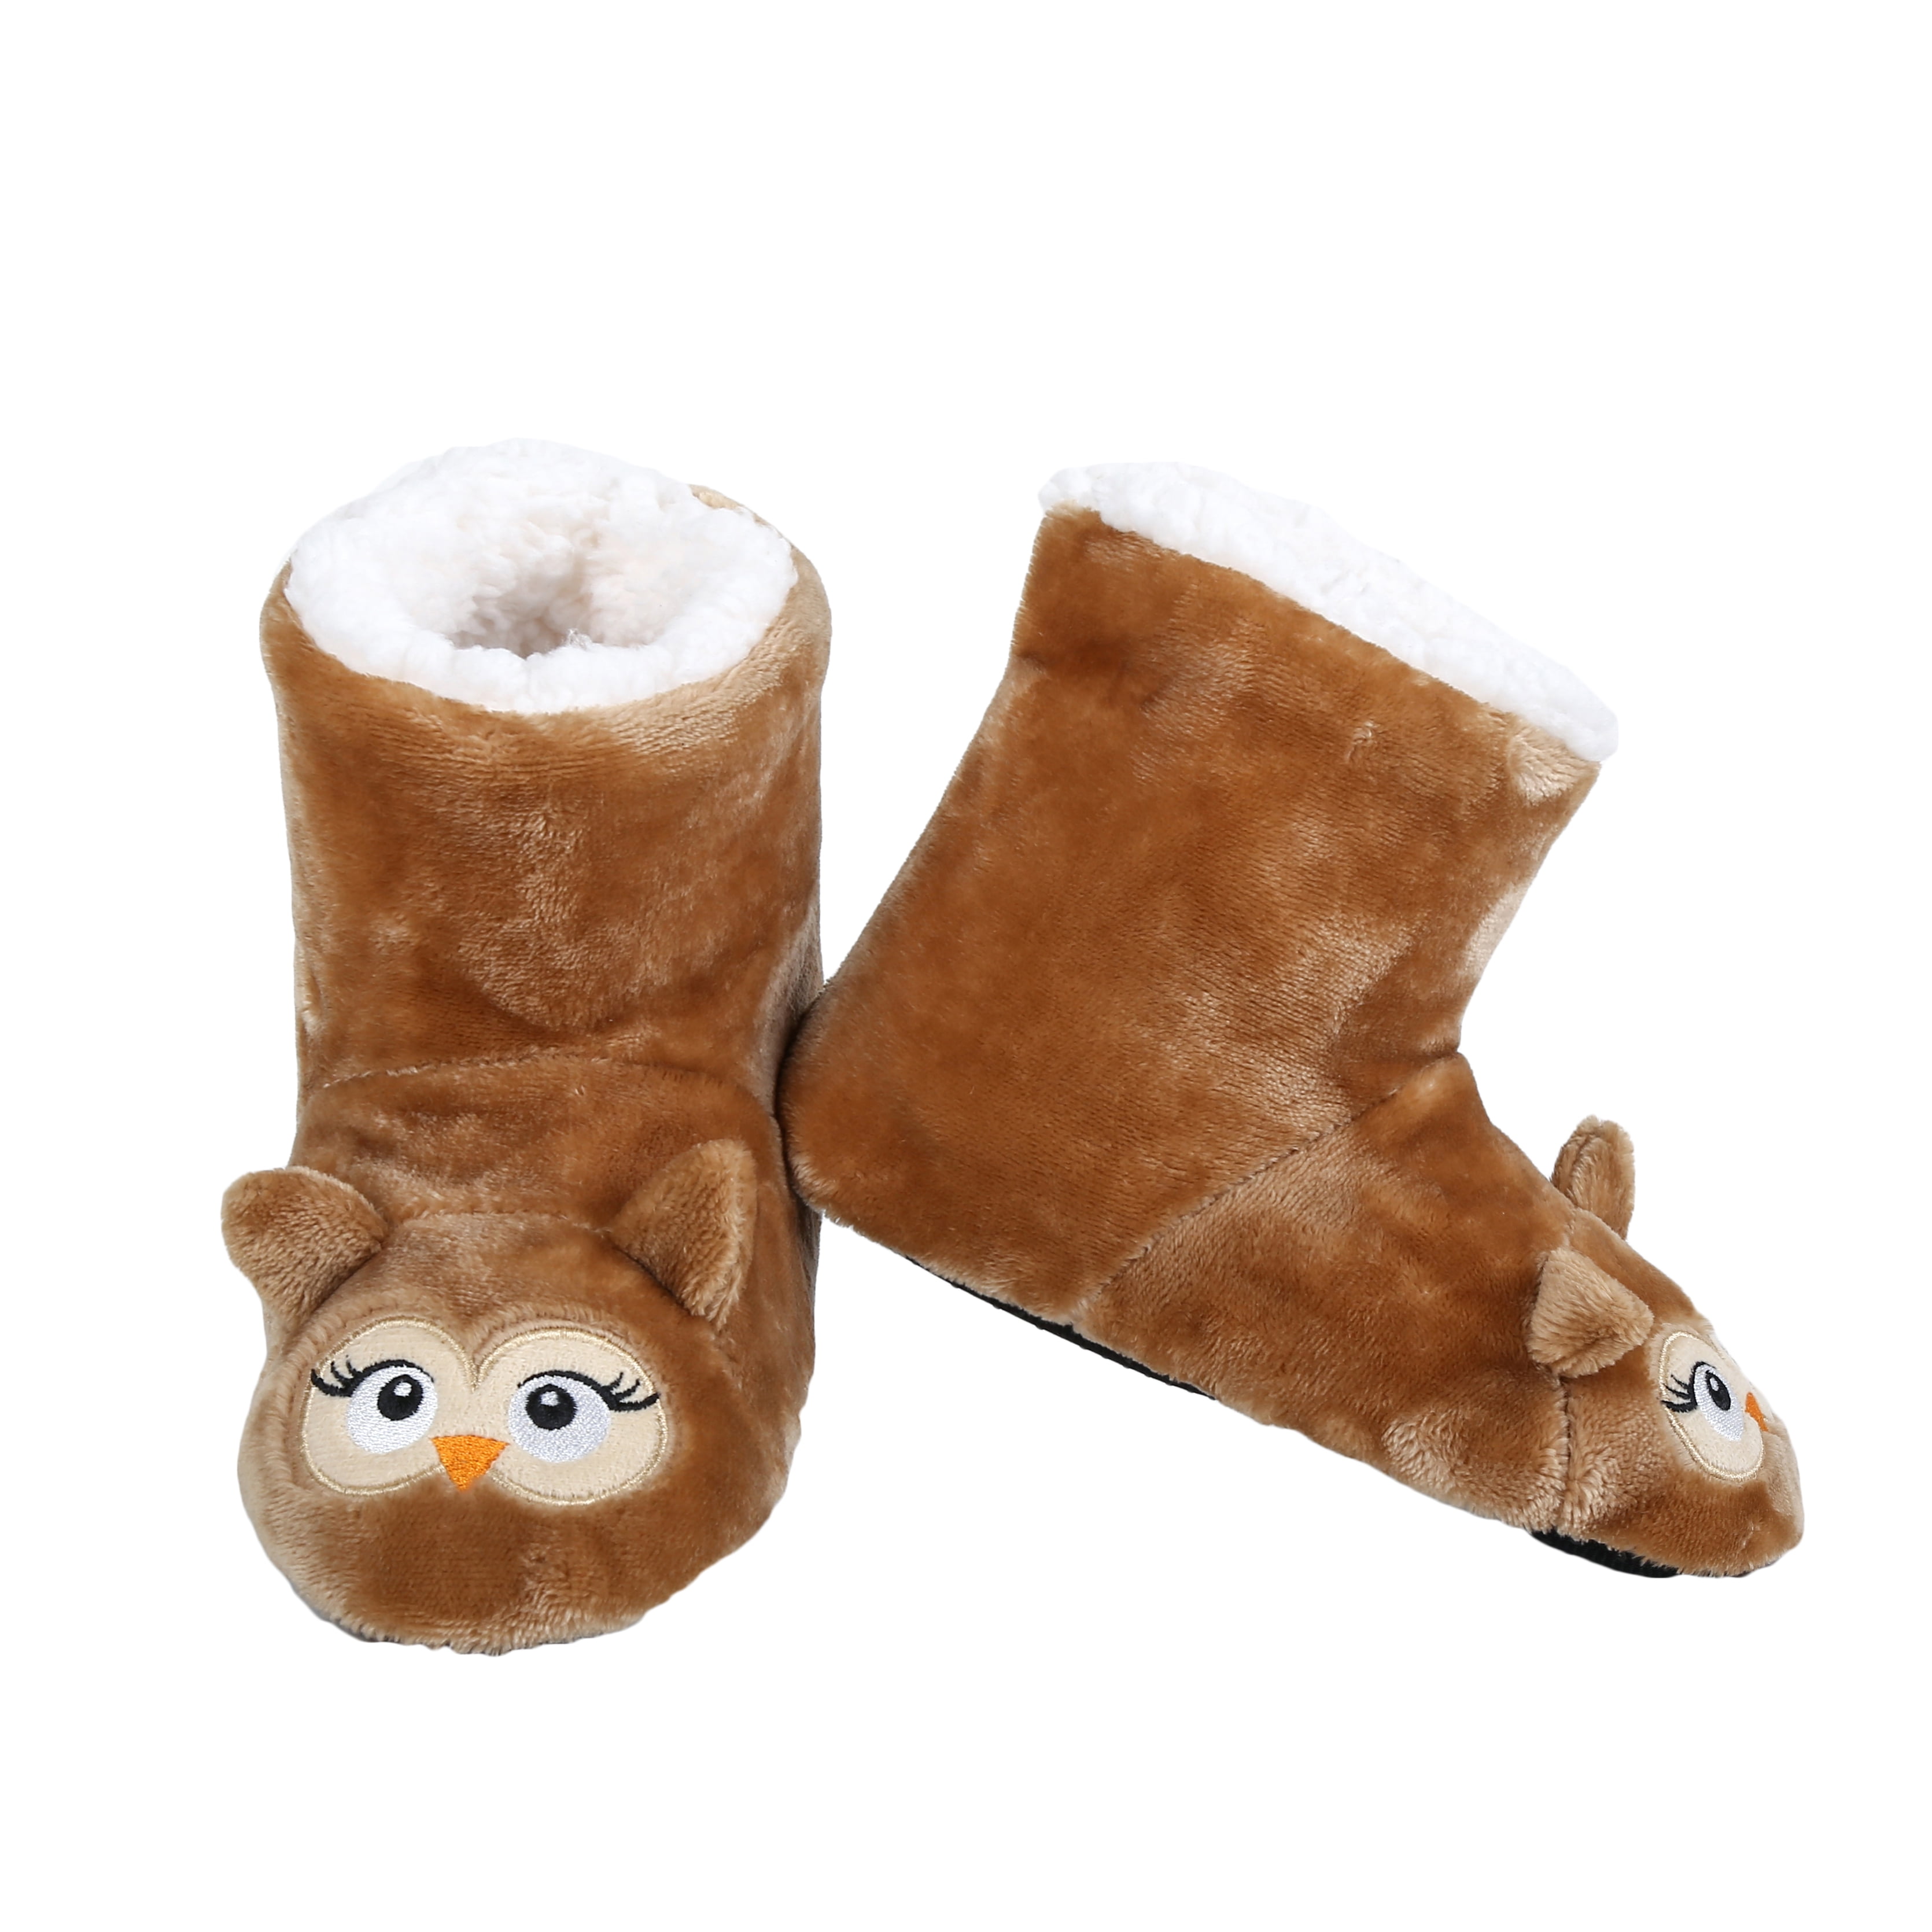 GIRLS KIDS KNITTED OWL FUR LINED PULL ON BOOTIES WARM INDOOR WINTER SLIPPERS OWL 